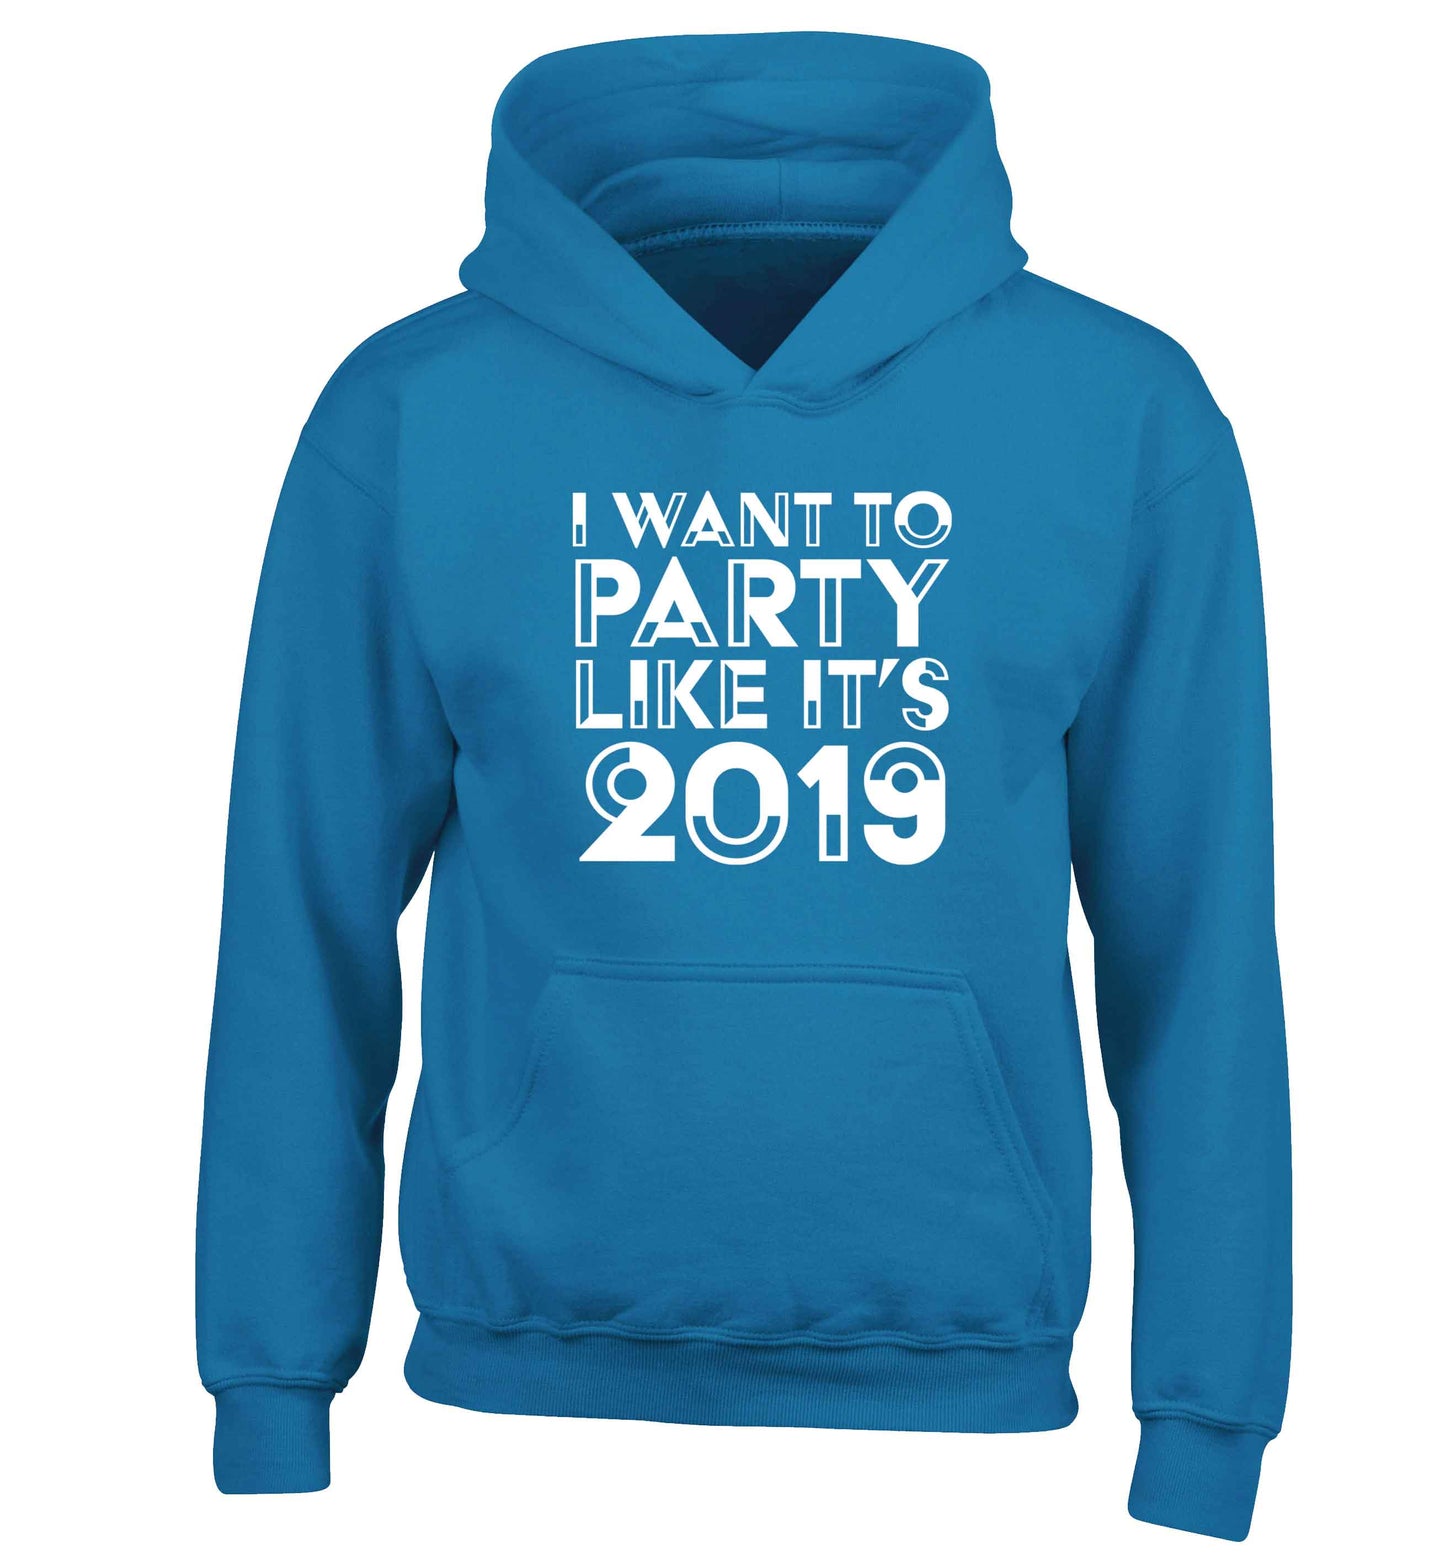 I want to party like it's 2019 children's blue hoodie 12-13 Years